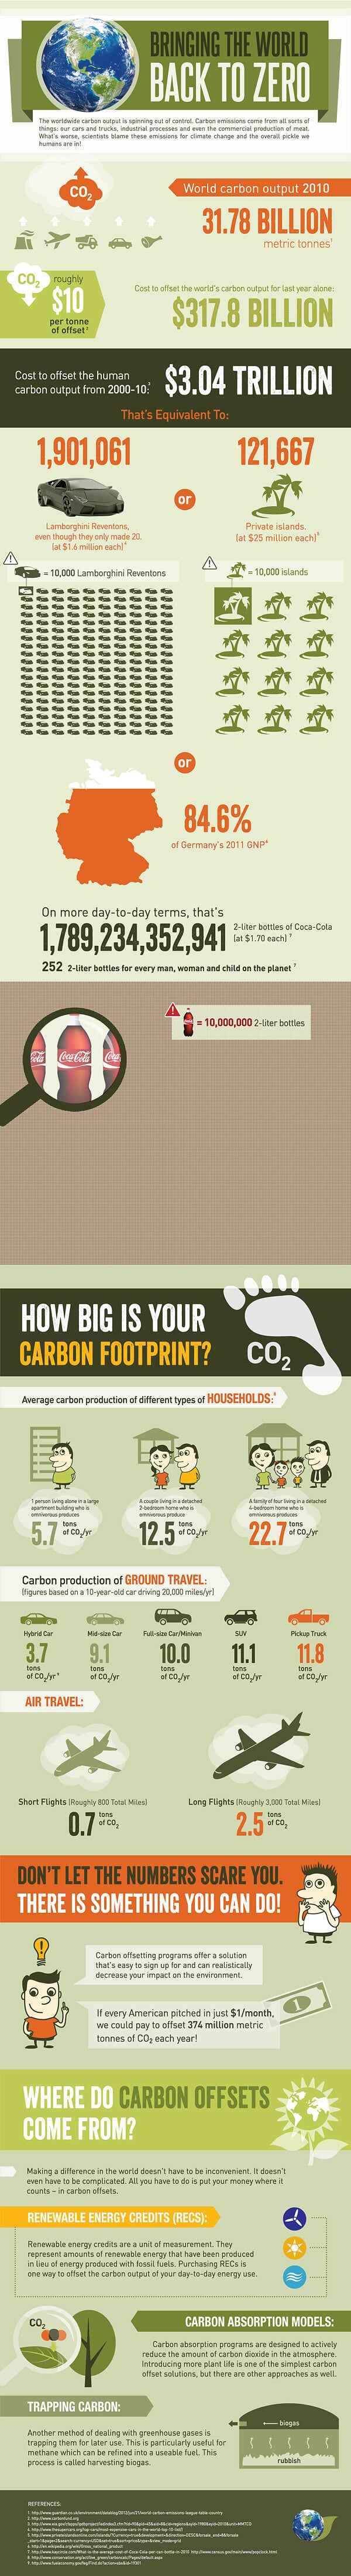 Offsetting global carbon footprint - infographic